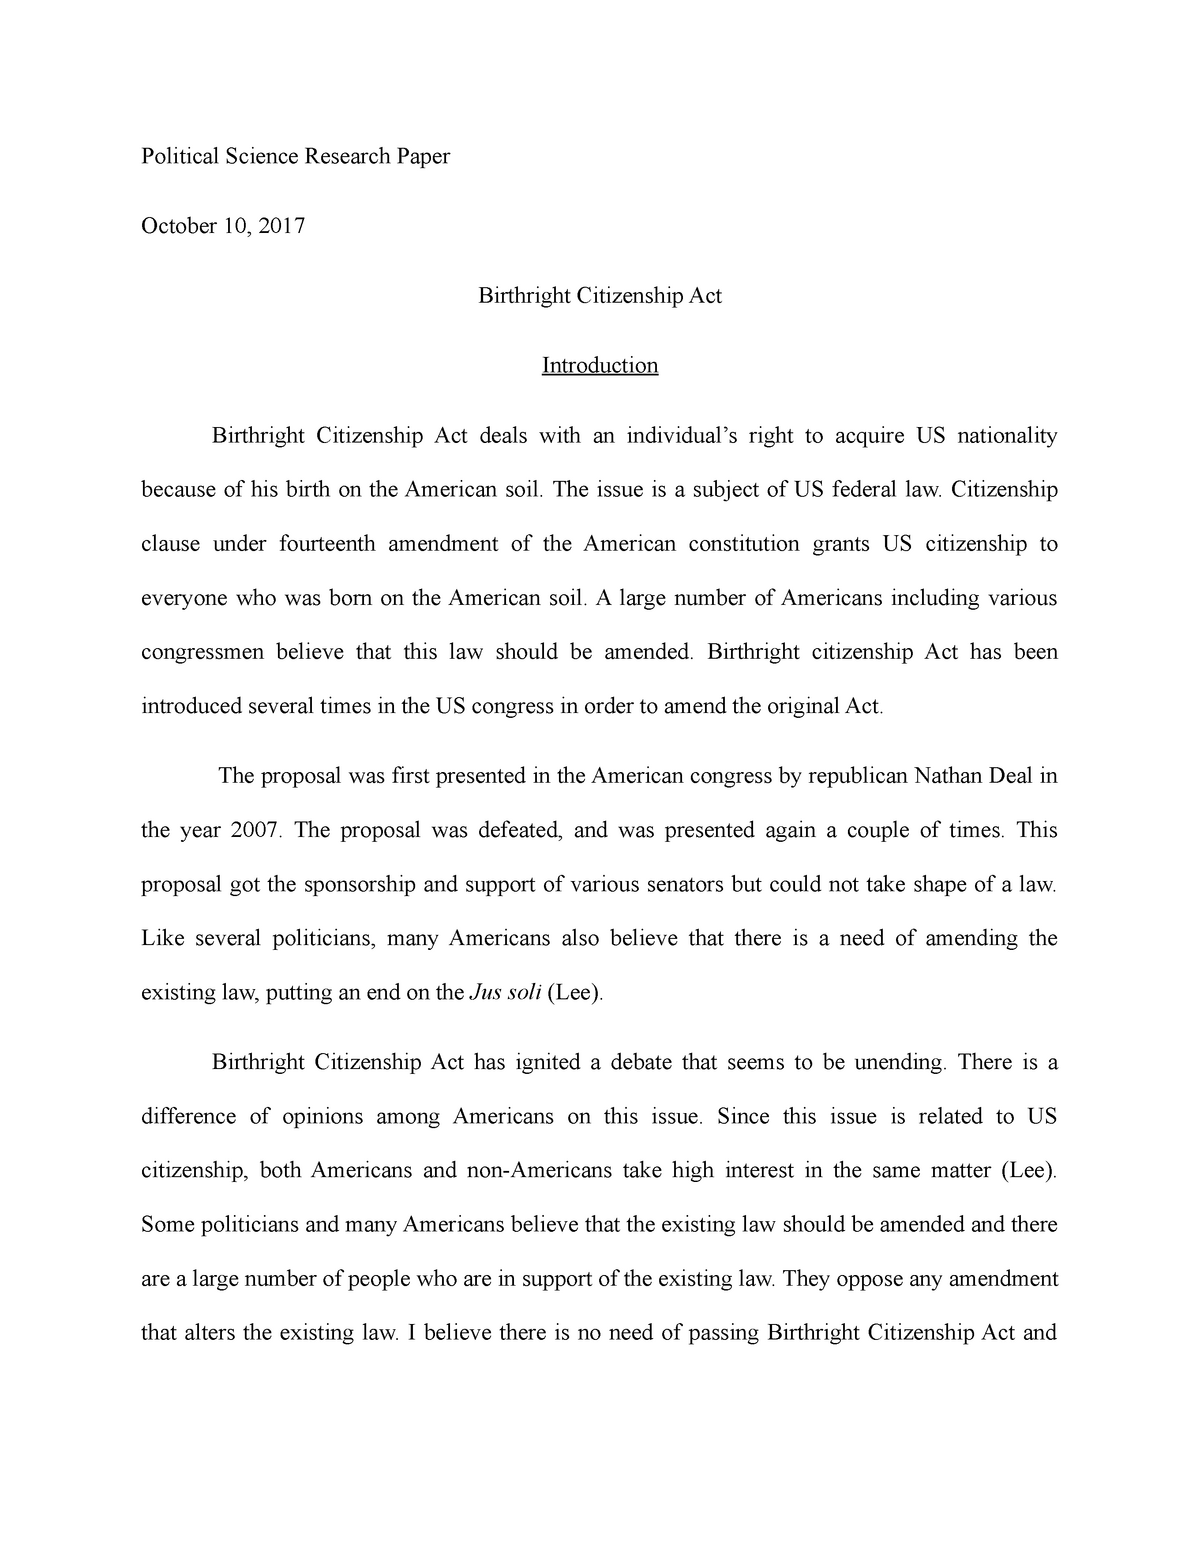 political science research paper example pdf